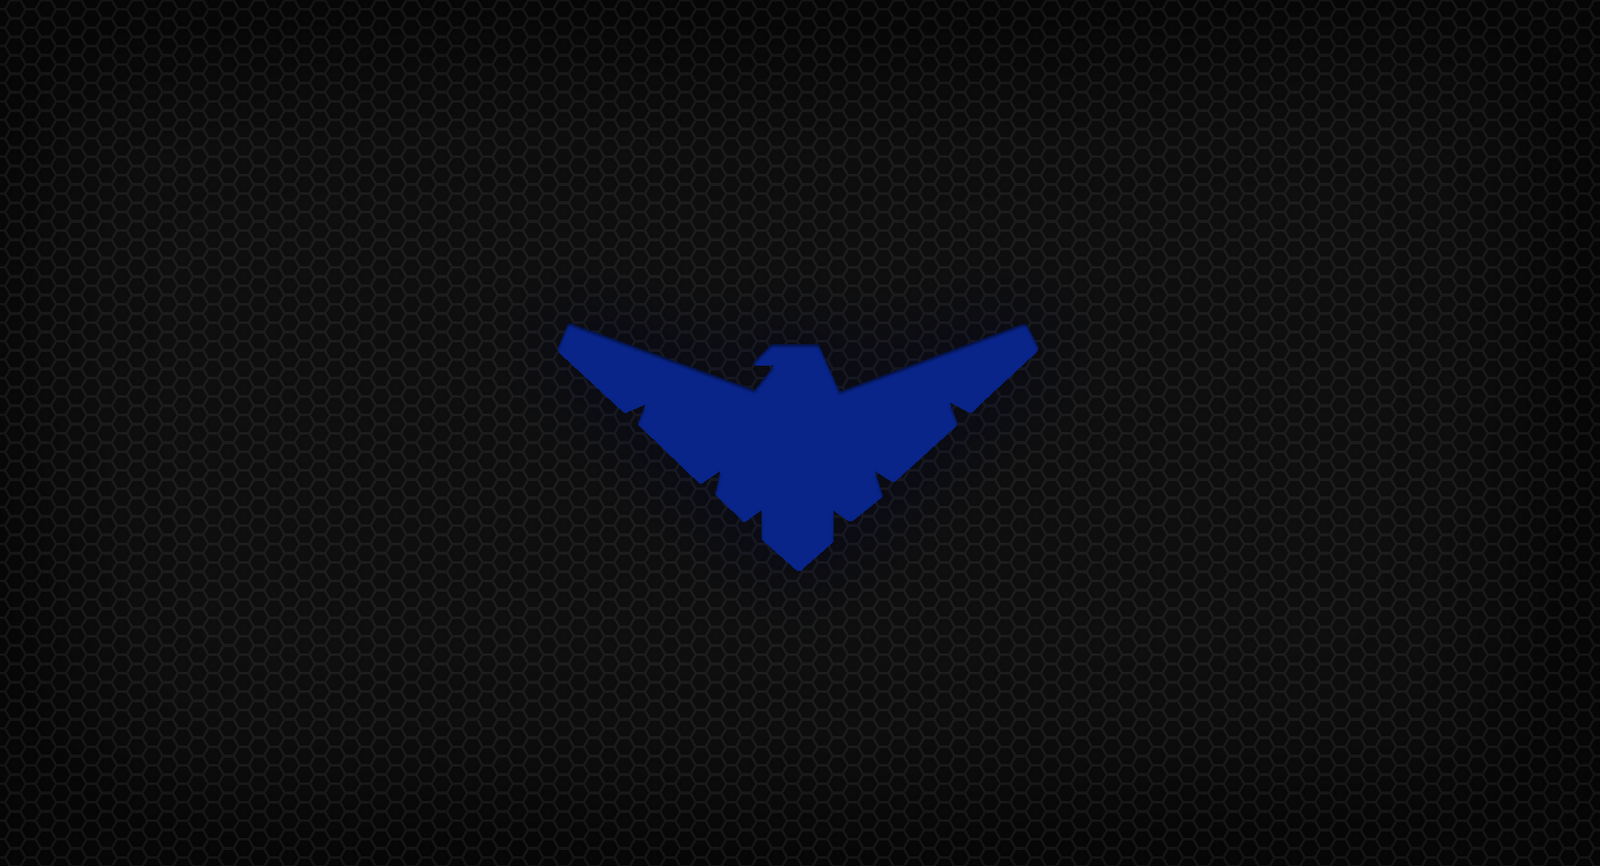 Nightwing Wallpapers - Wallpaper Cave